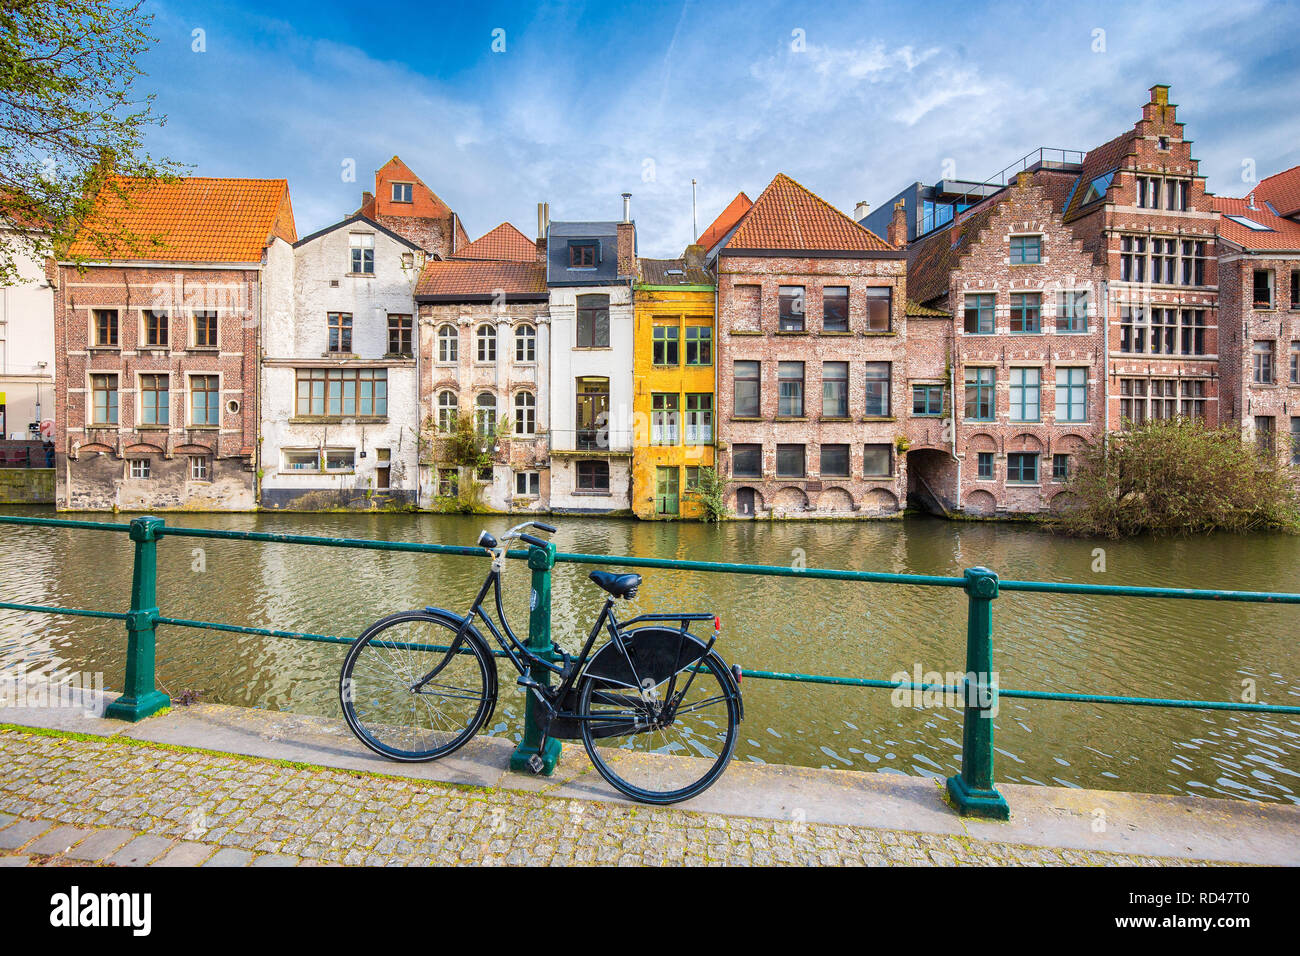 Beautiful view of the historic city of Ghent with traditional colorful buildings and old bicycle, Flanders region, Belgium Stock Photo